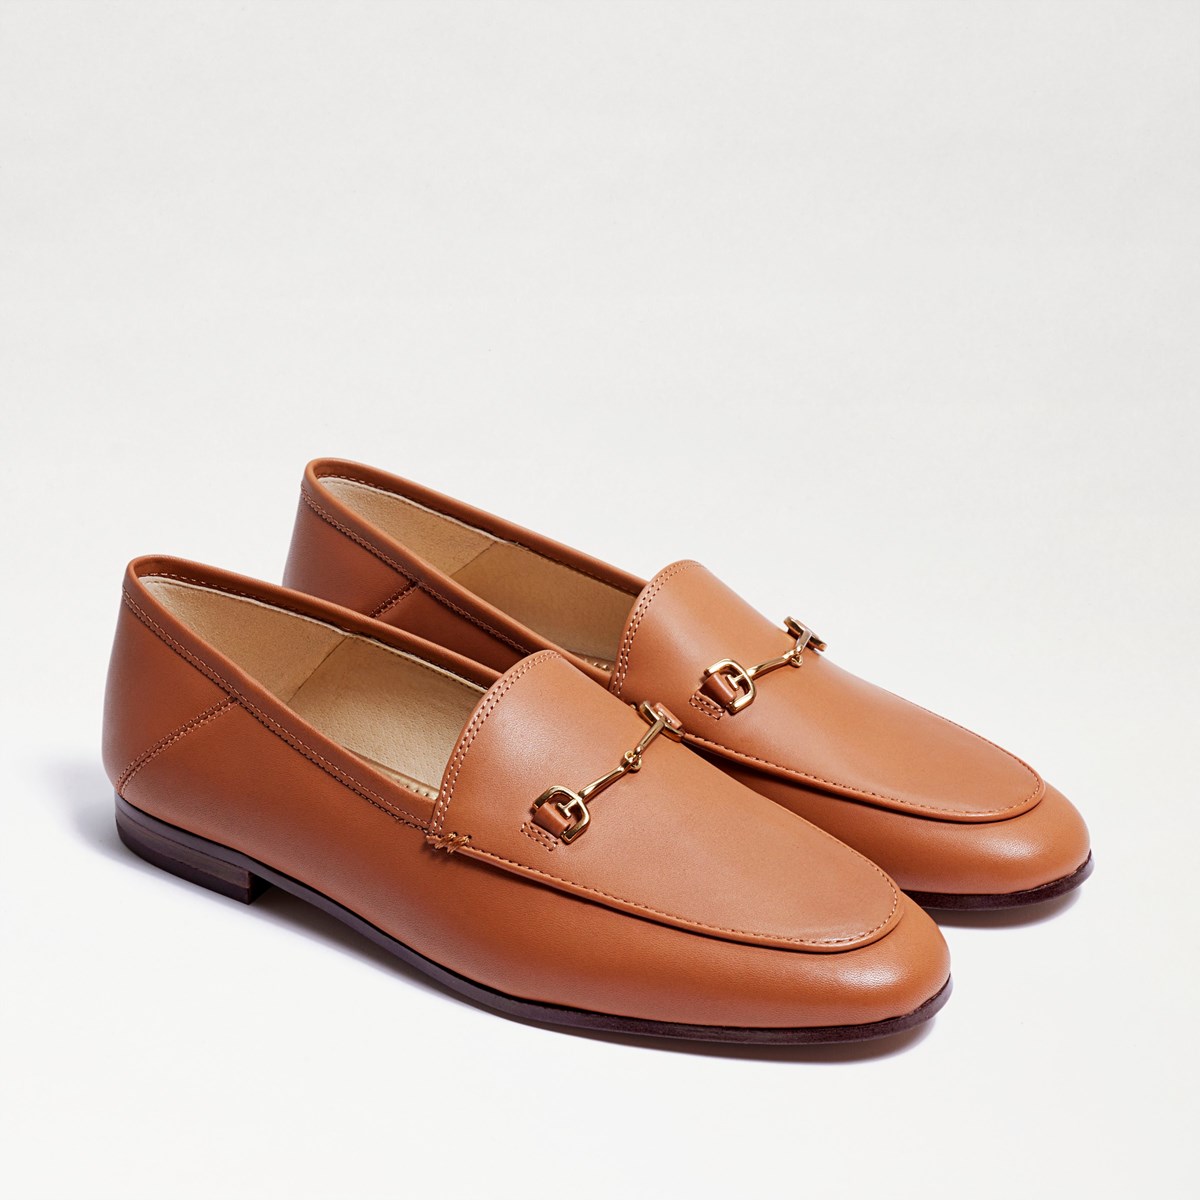 Sam Edelman Loraine Bit Loafer, Saddle Leather | Womens Flats and Loafers